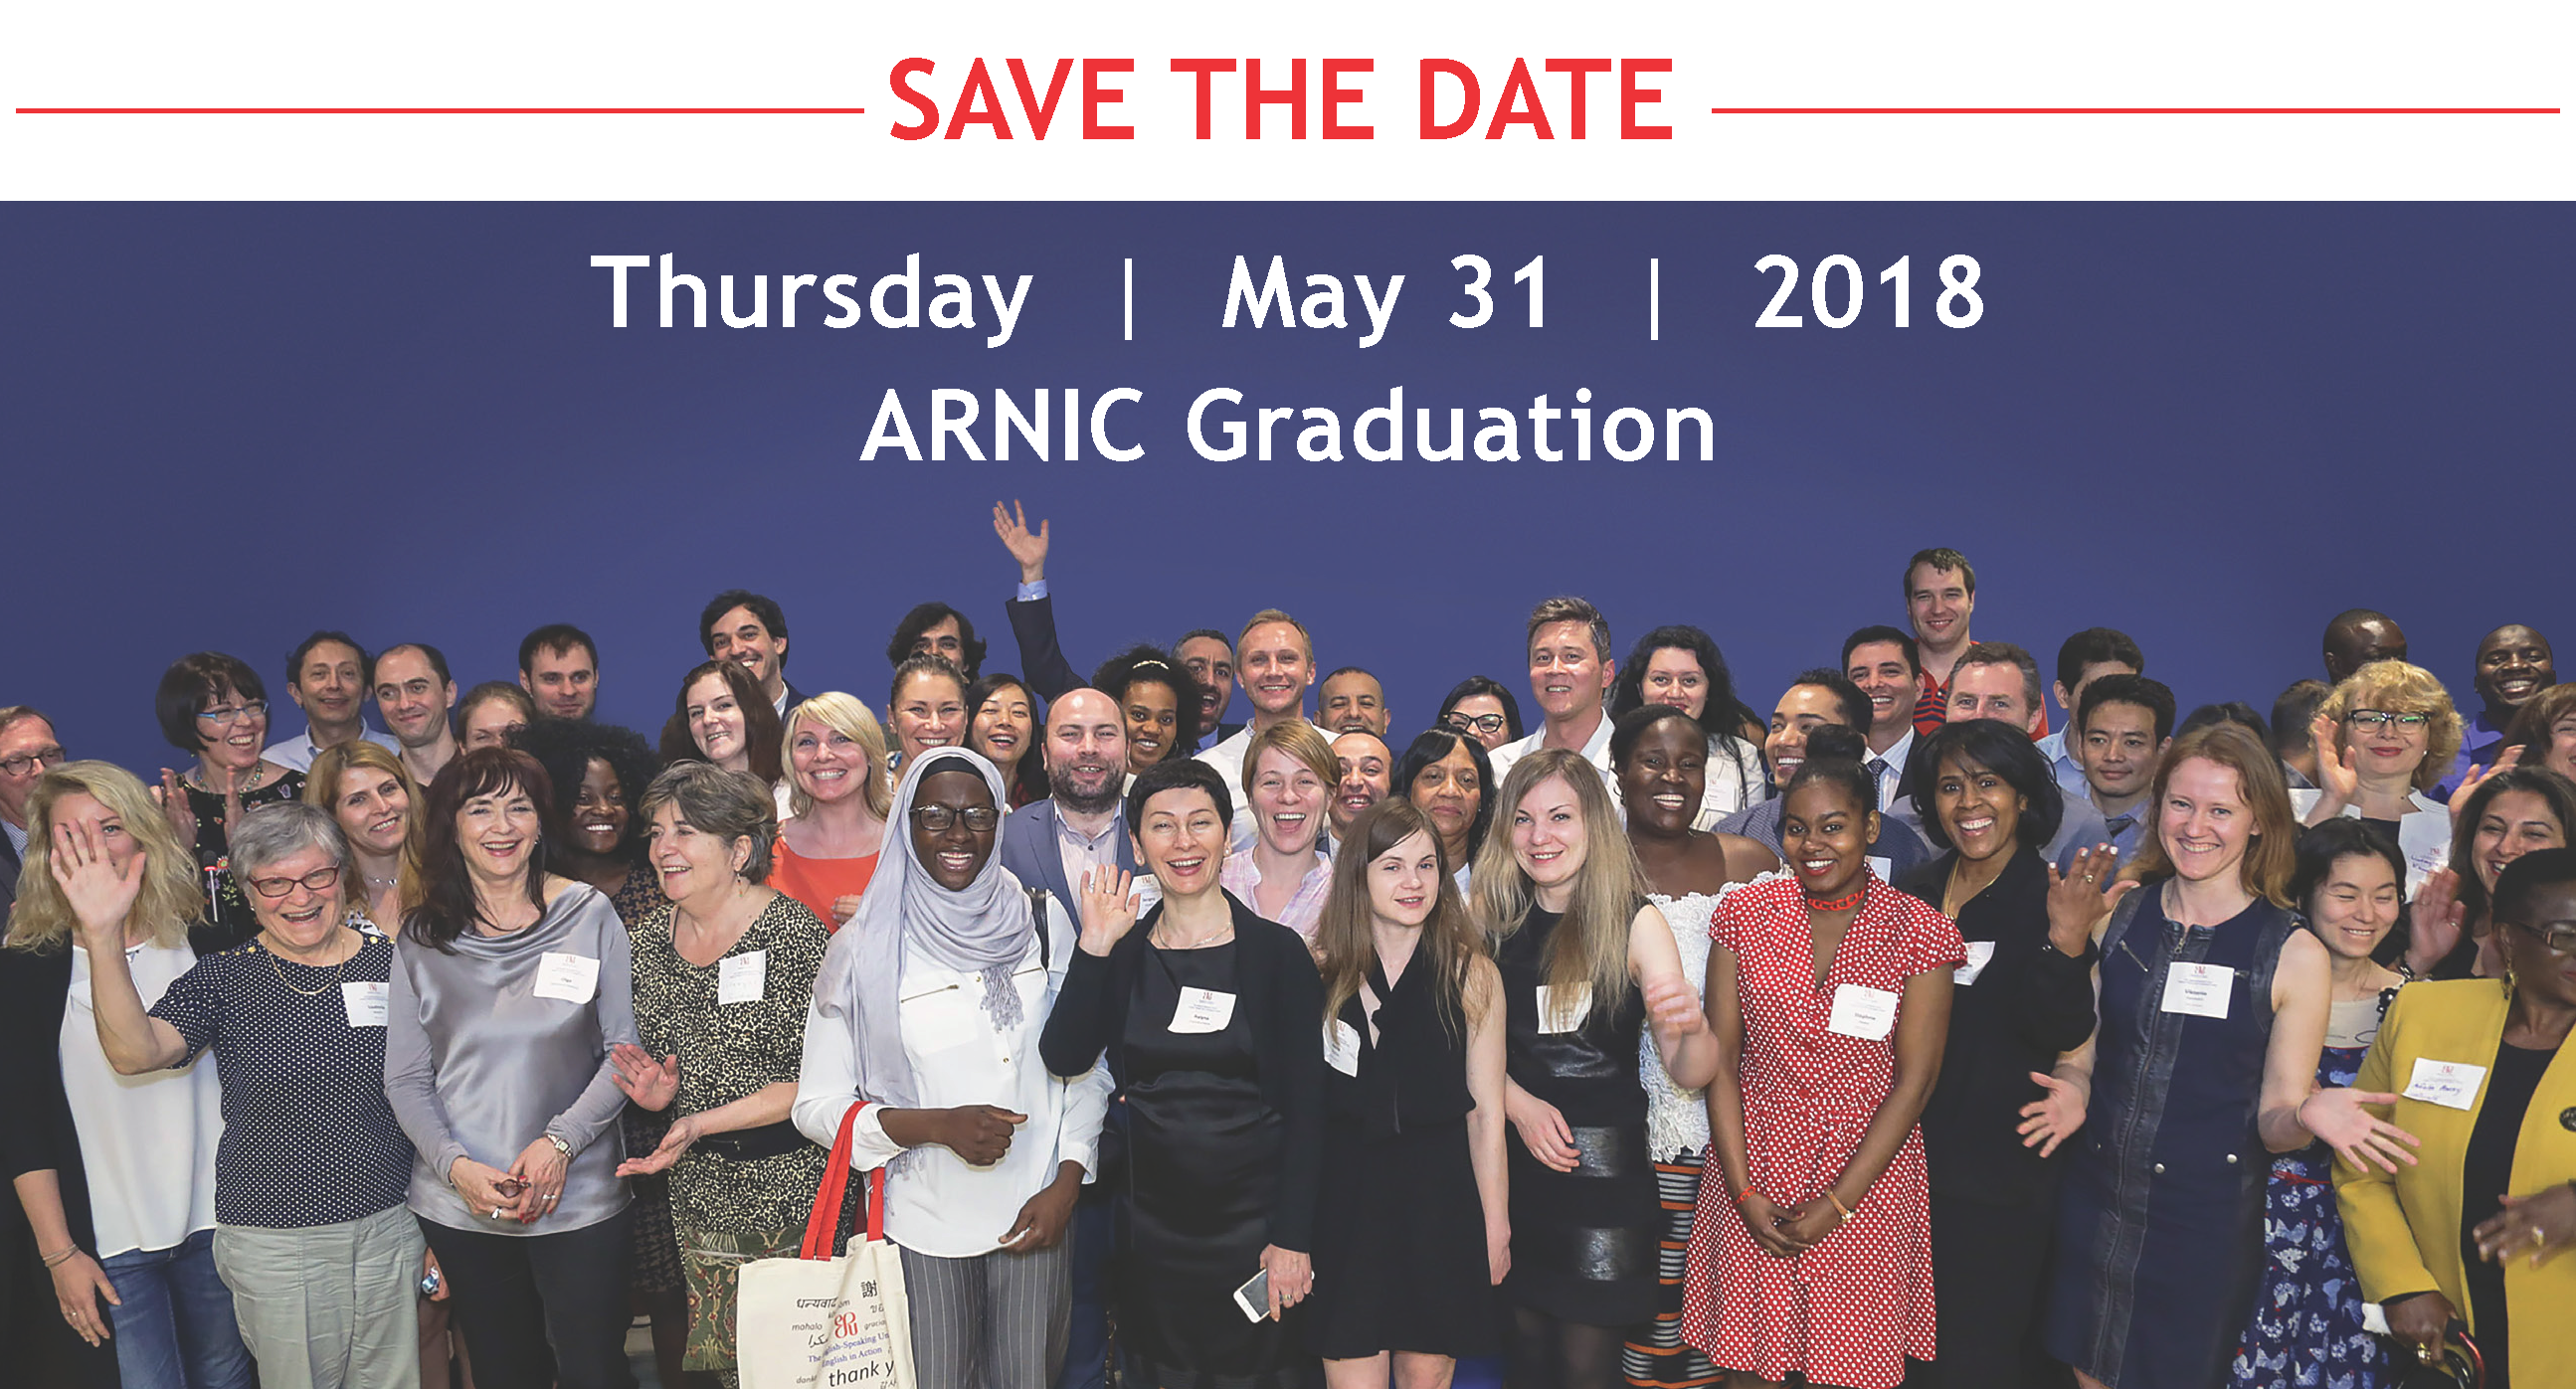 ARNIC Graduation Save the date: May 31, 2018